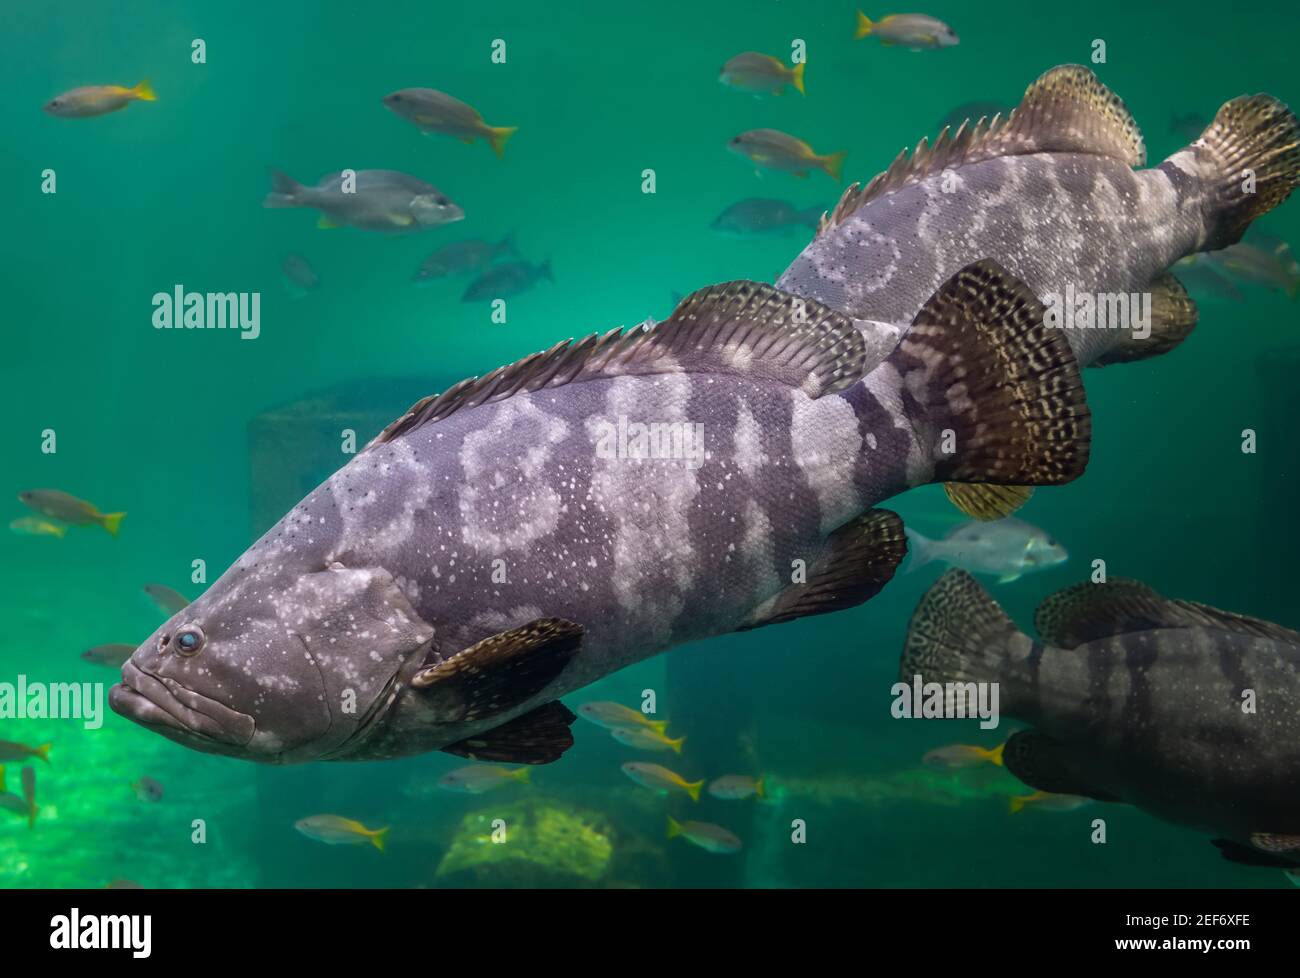 Giant grouper or brown spotted grouper fish swimming under green sea water with sun lighting. Stock Photo